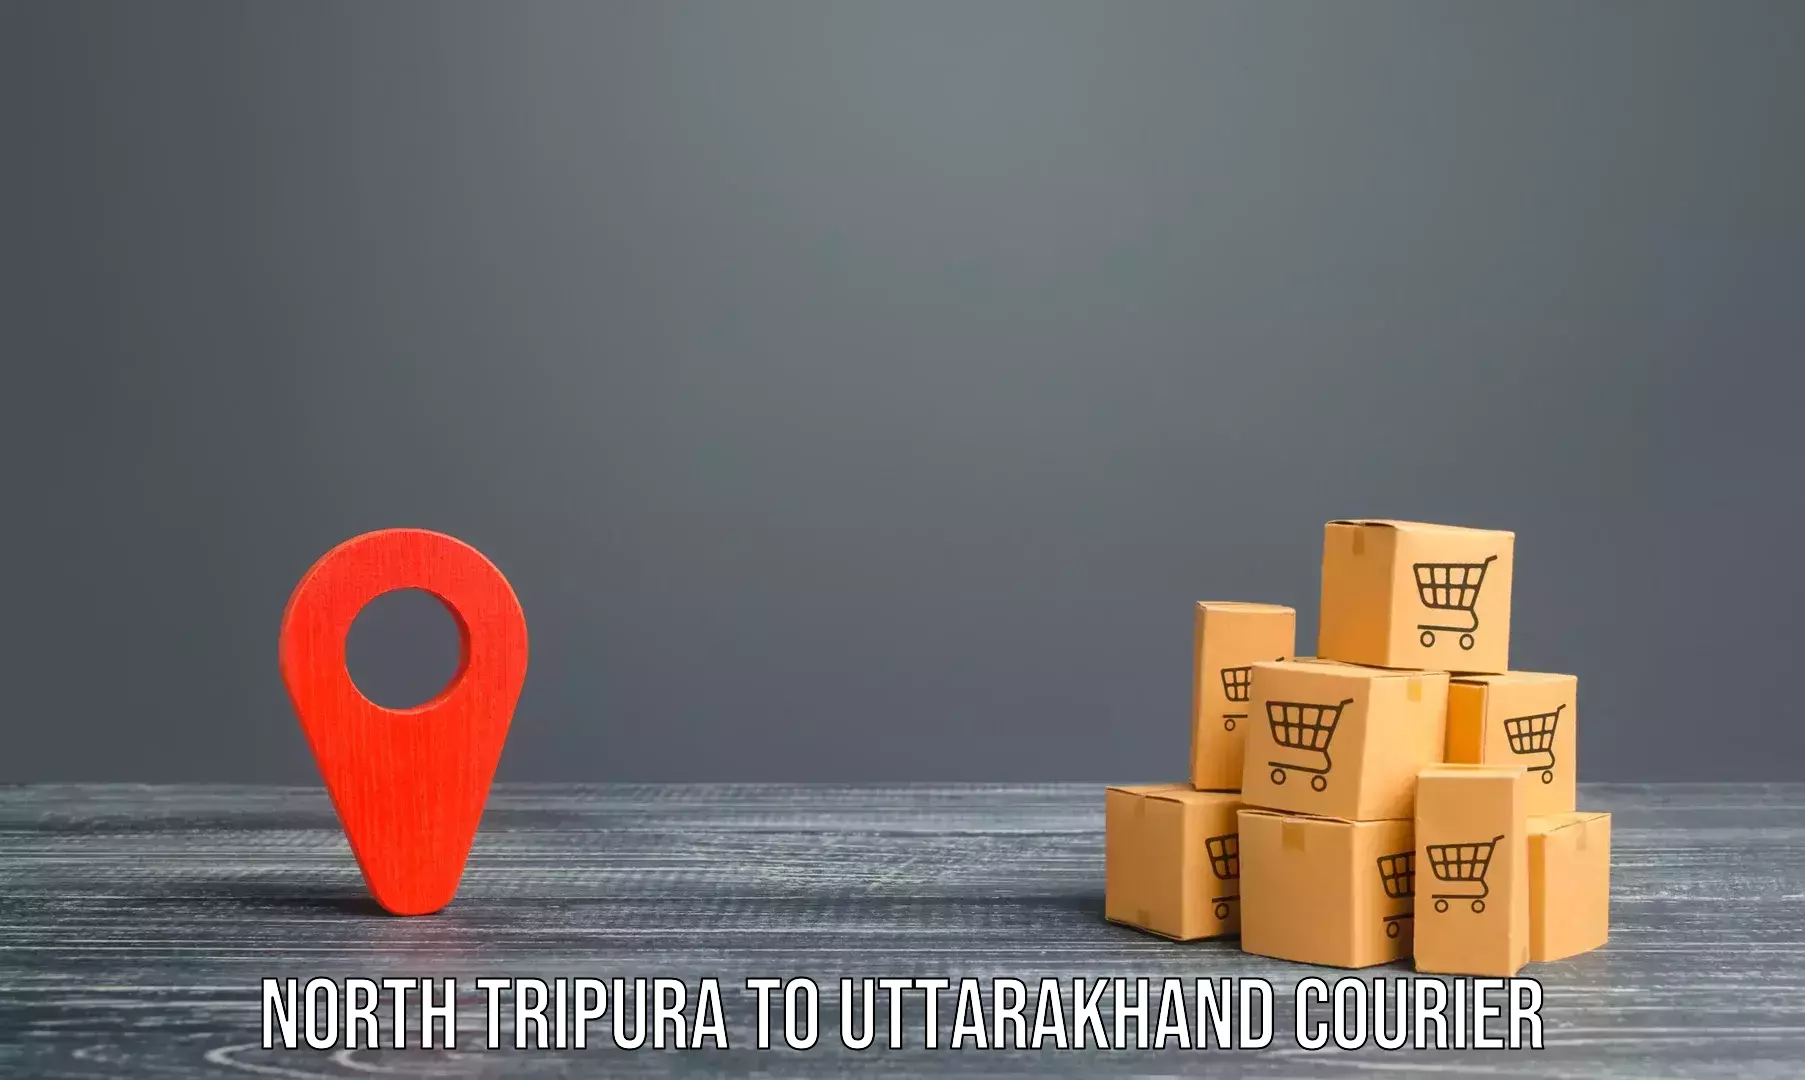 Professional movers and packers in North Tripura to Someshwar